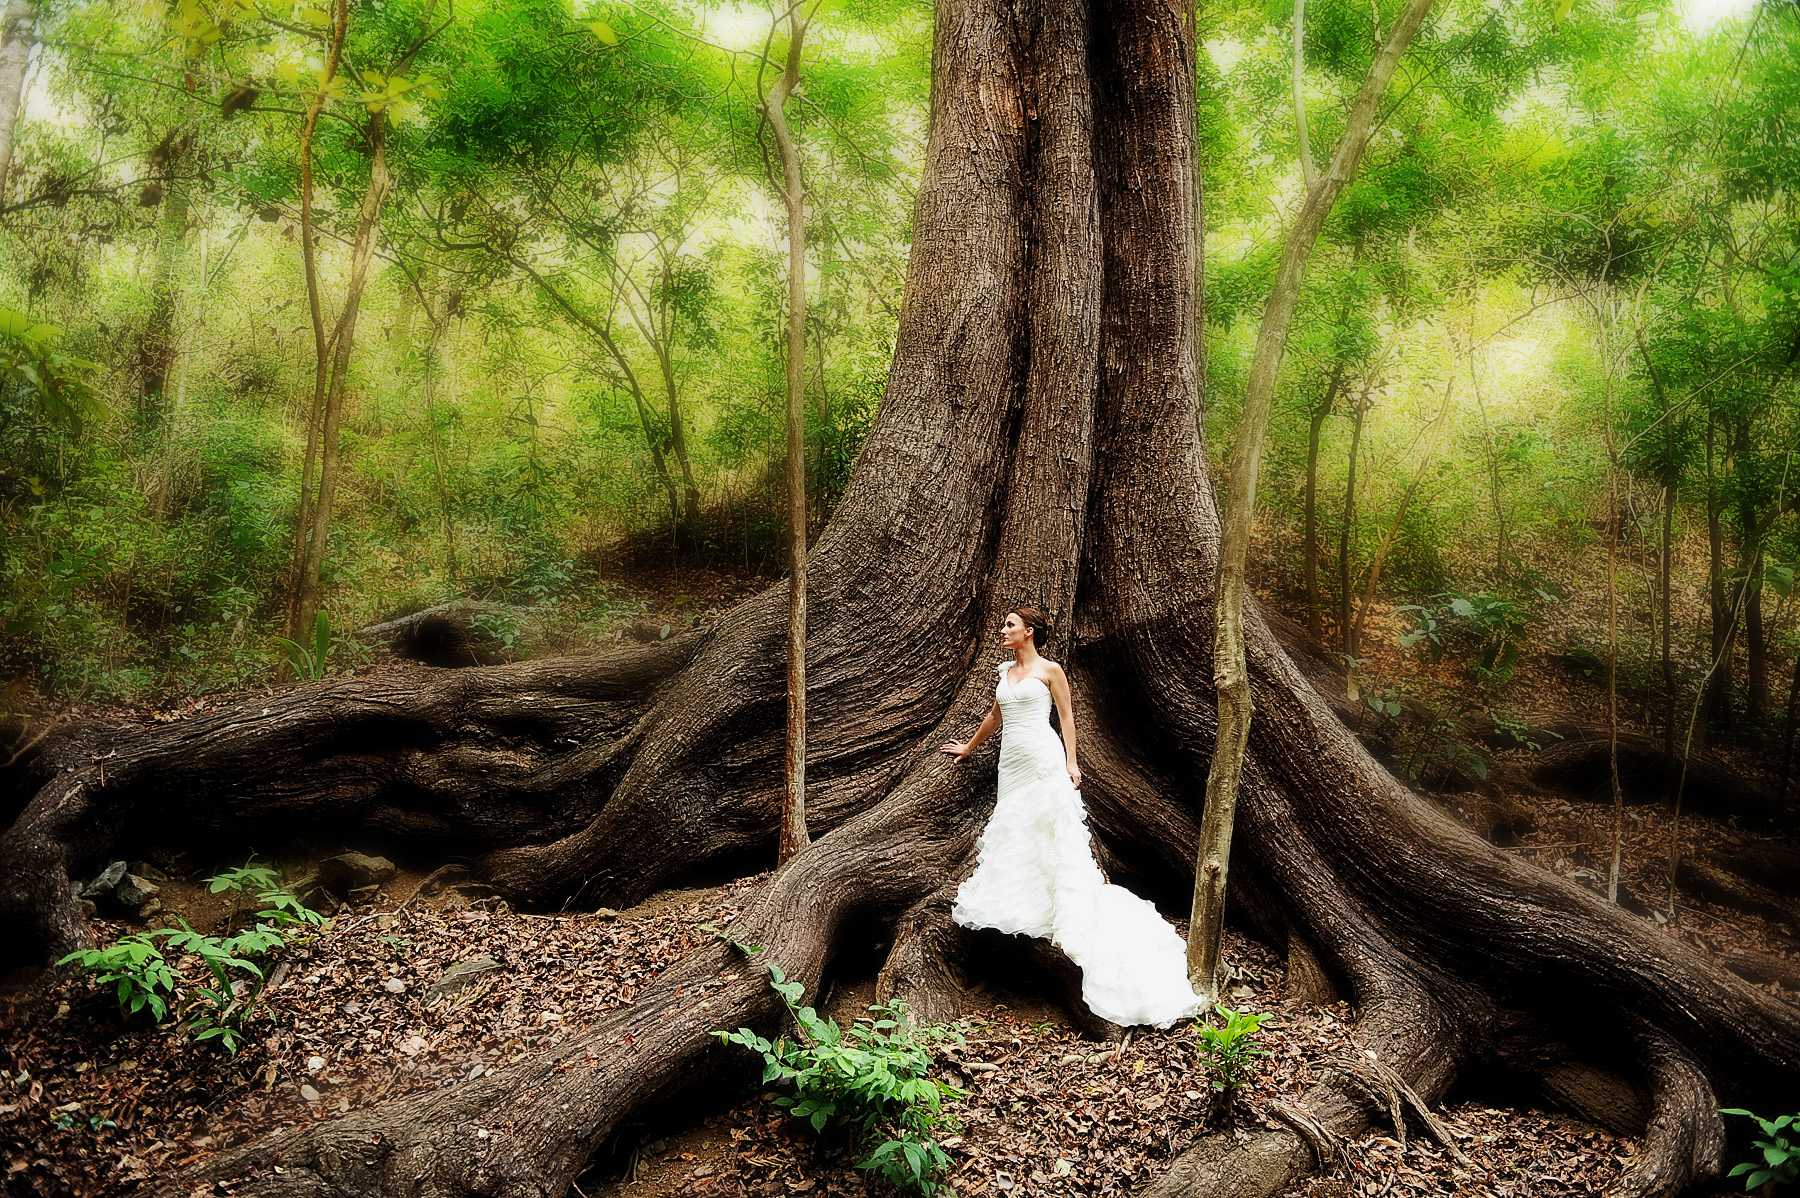 A bride in the forest by a large tree